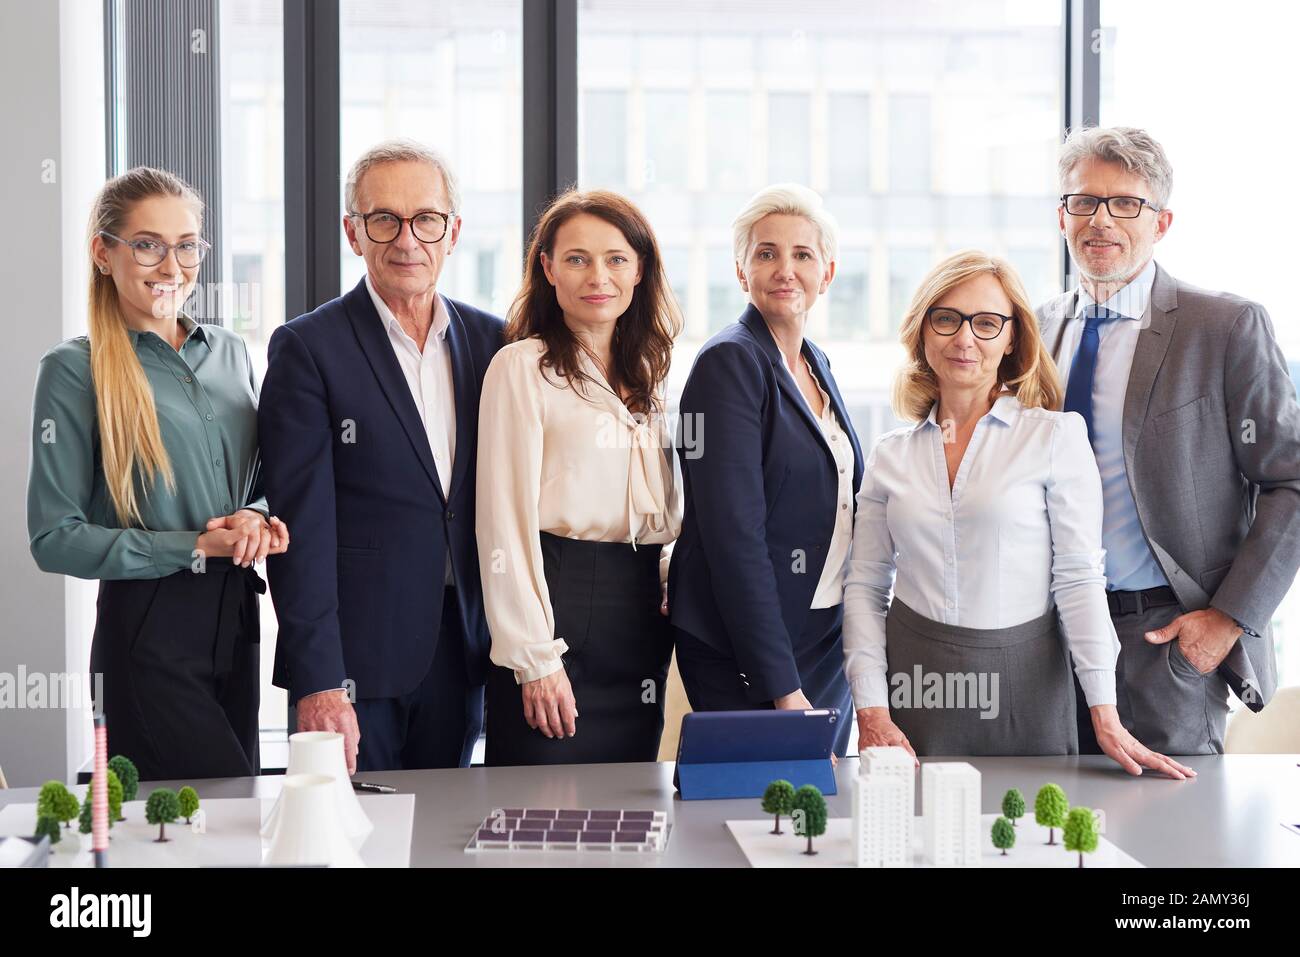 Portrait of business people in conference room Stock Photo